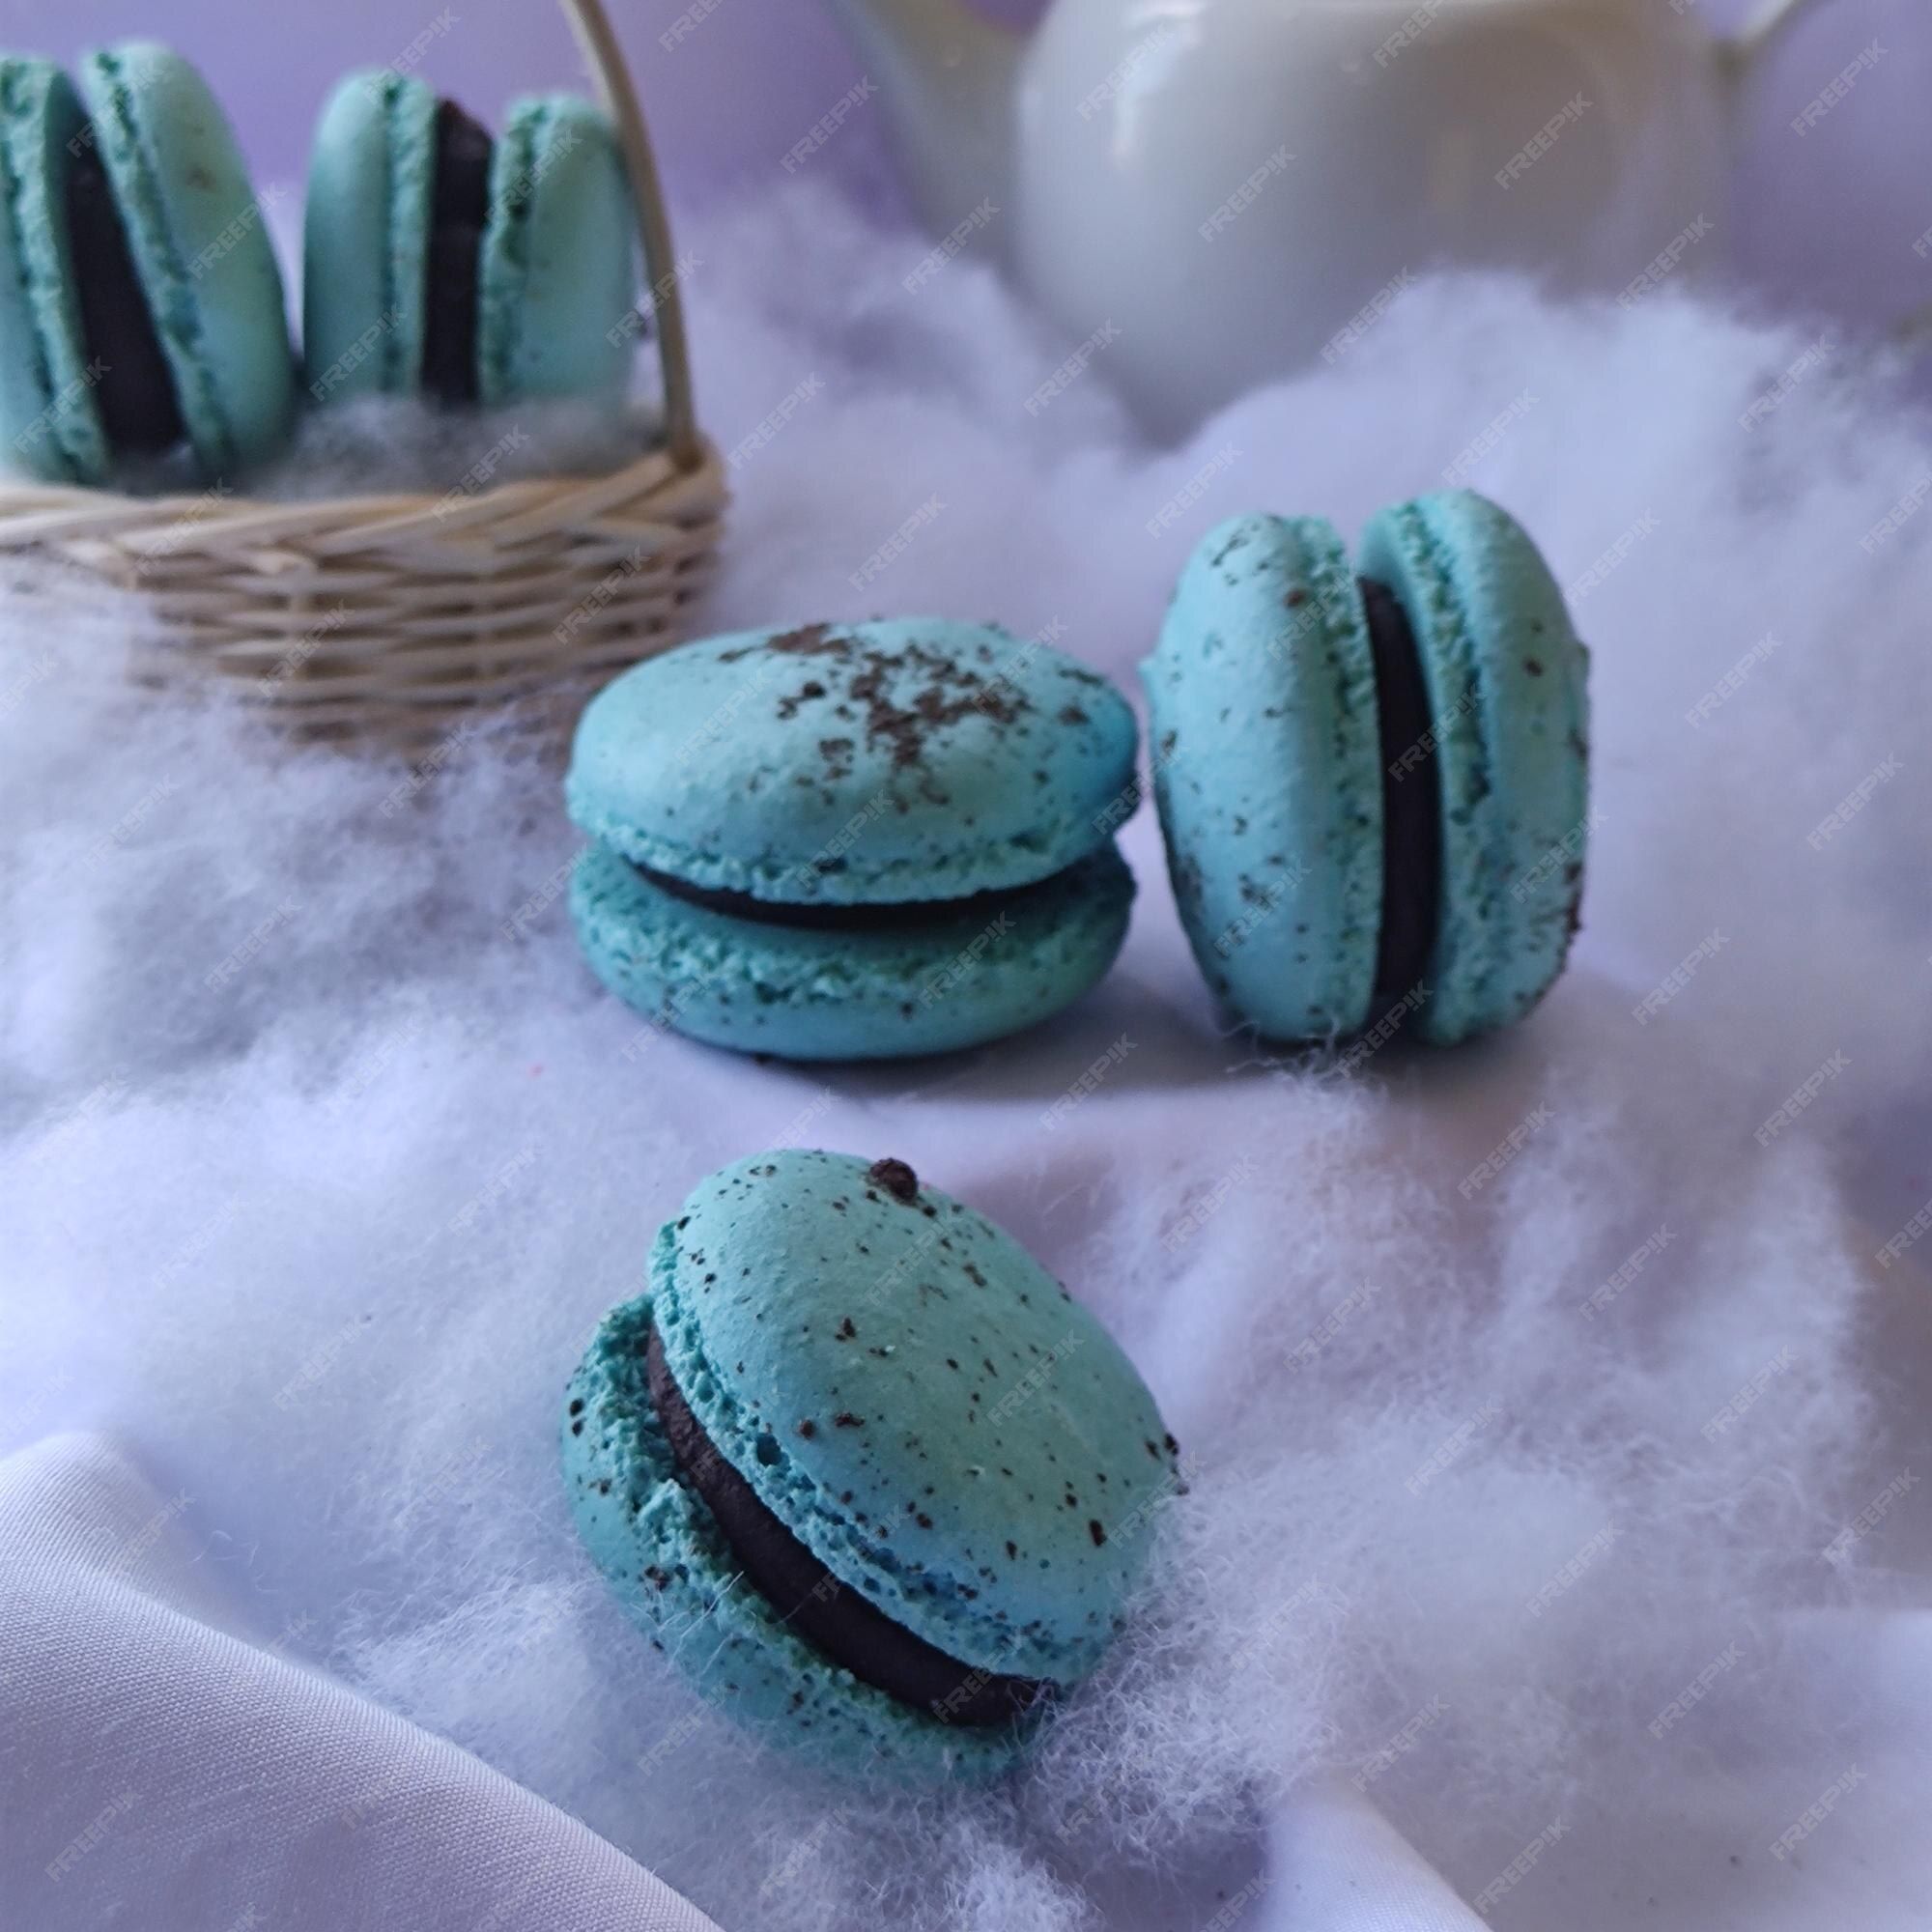 Premium Photo. Image of a blue macaron against a white background